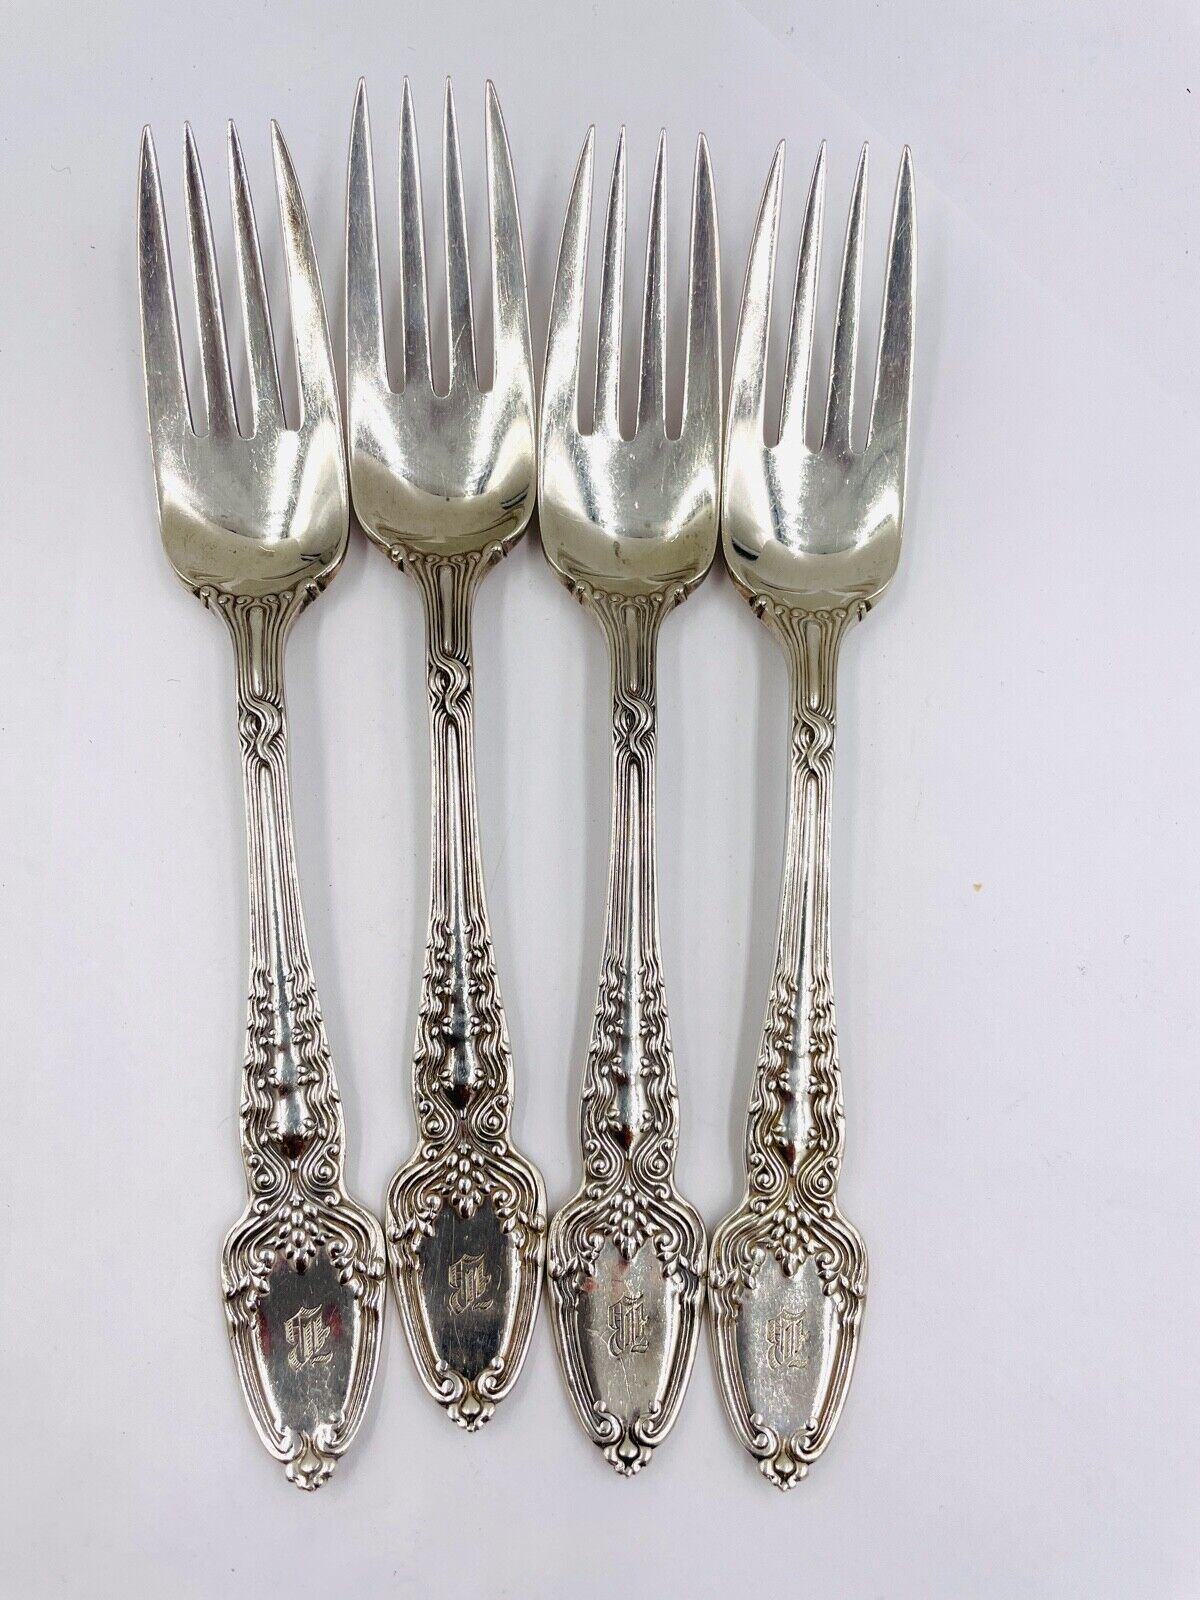 Broom Corn by Tiffany & Co. Sterling Silver Pastry Fork 4-tine 6" set of 4